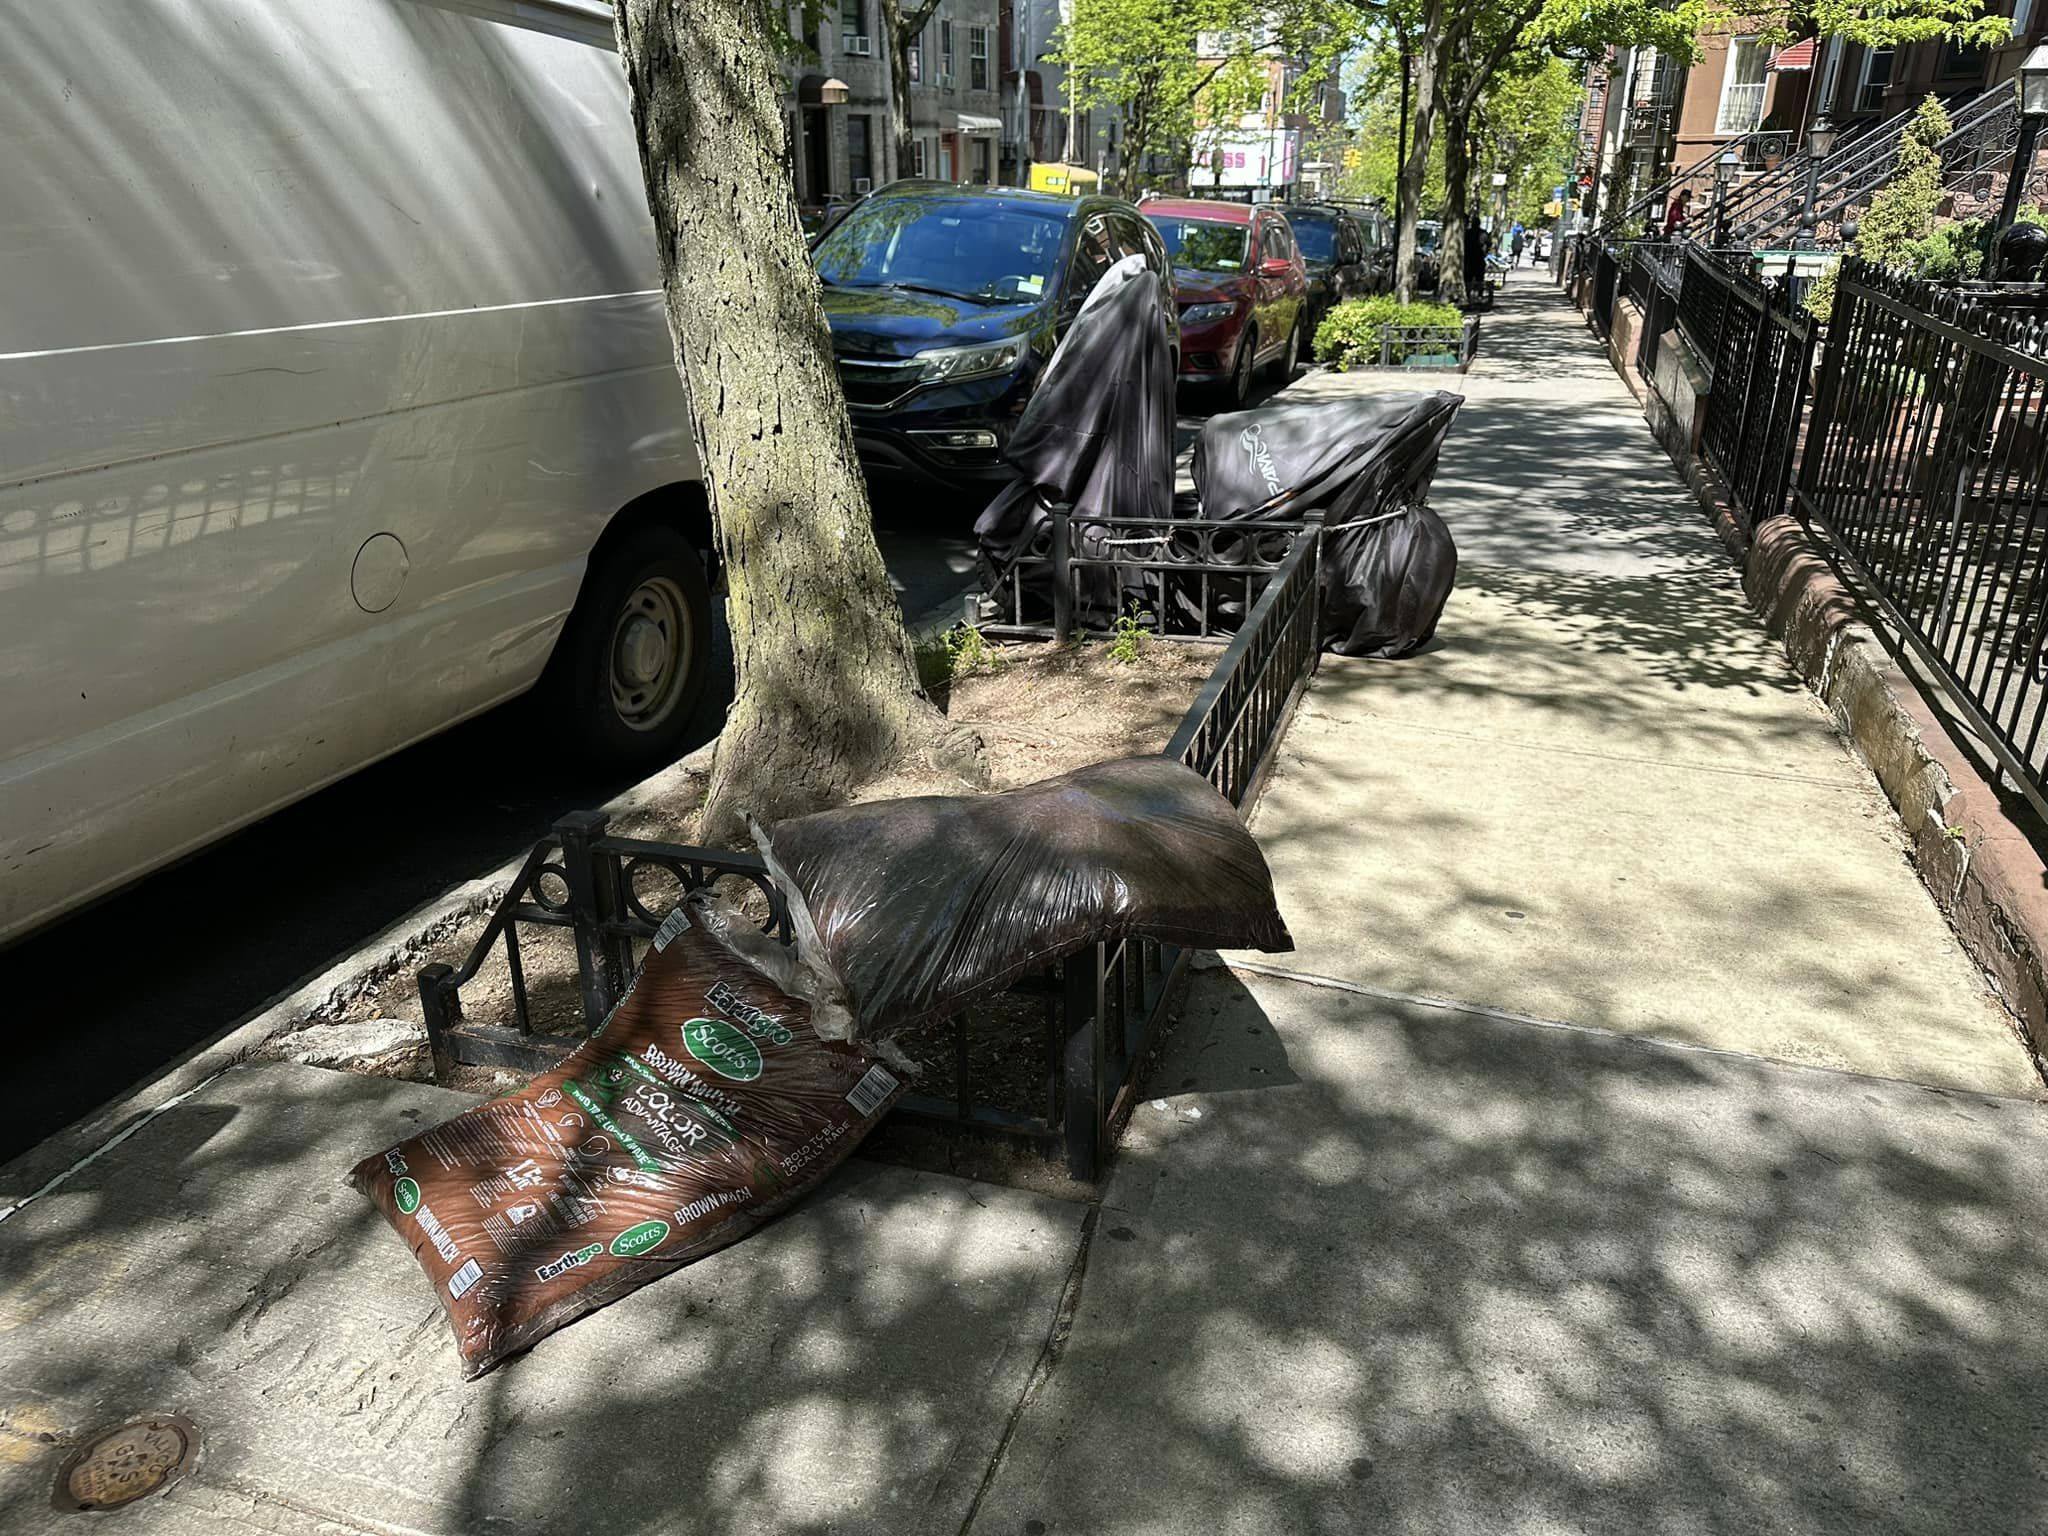 A city sidewalk lined with trees, with a small pile of garbage bags and a ripped open bag of soil near a parked van and covered motorbikes on a sunny day.